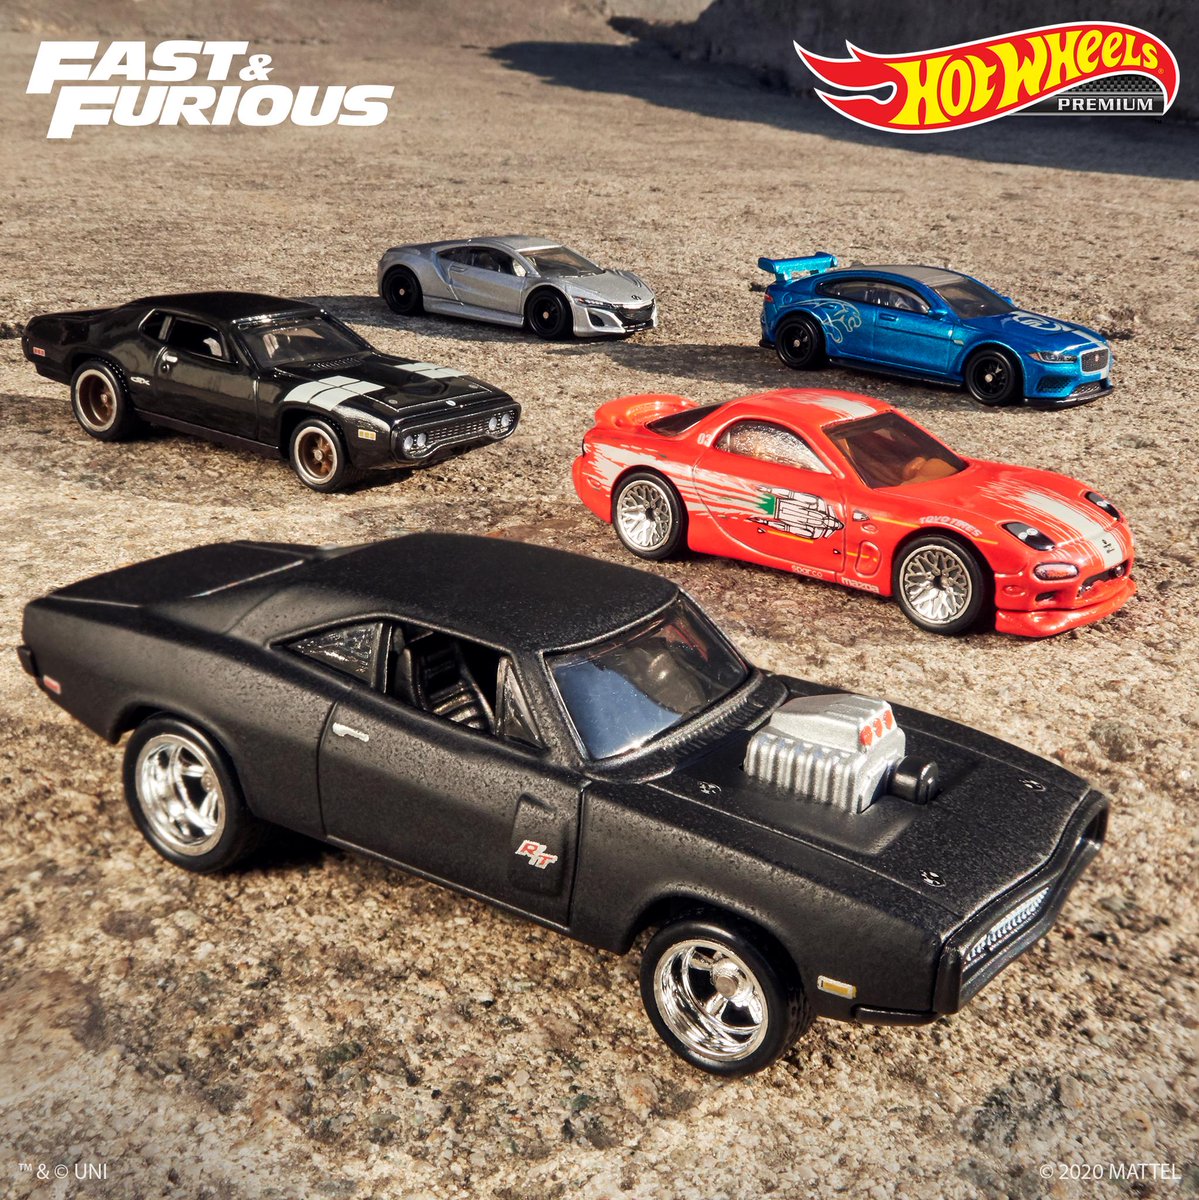 Colección FAST AND FURIOUS